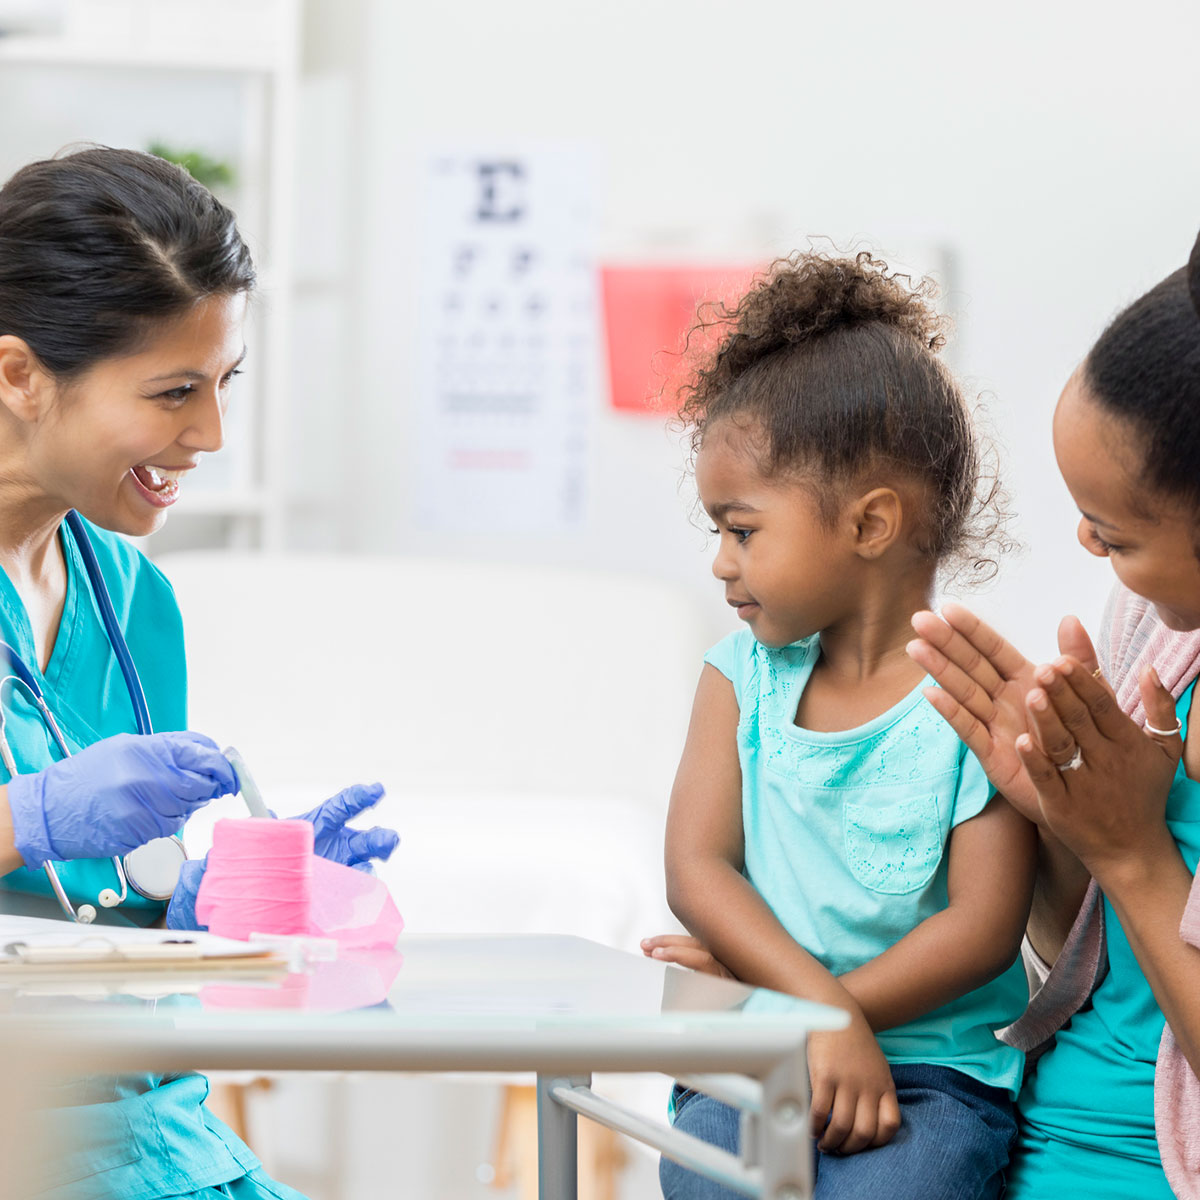 Nurse prepares young patient to receive a flu shot. Animated female nurse prepares young patient to receive a shot in the doctor's office. The patient's mother is clapping while encouraging her child.